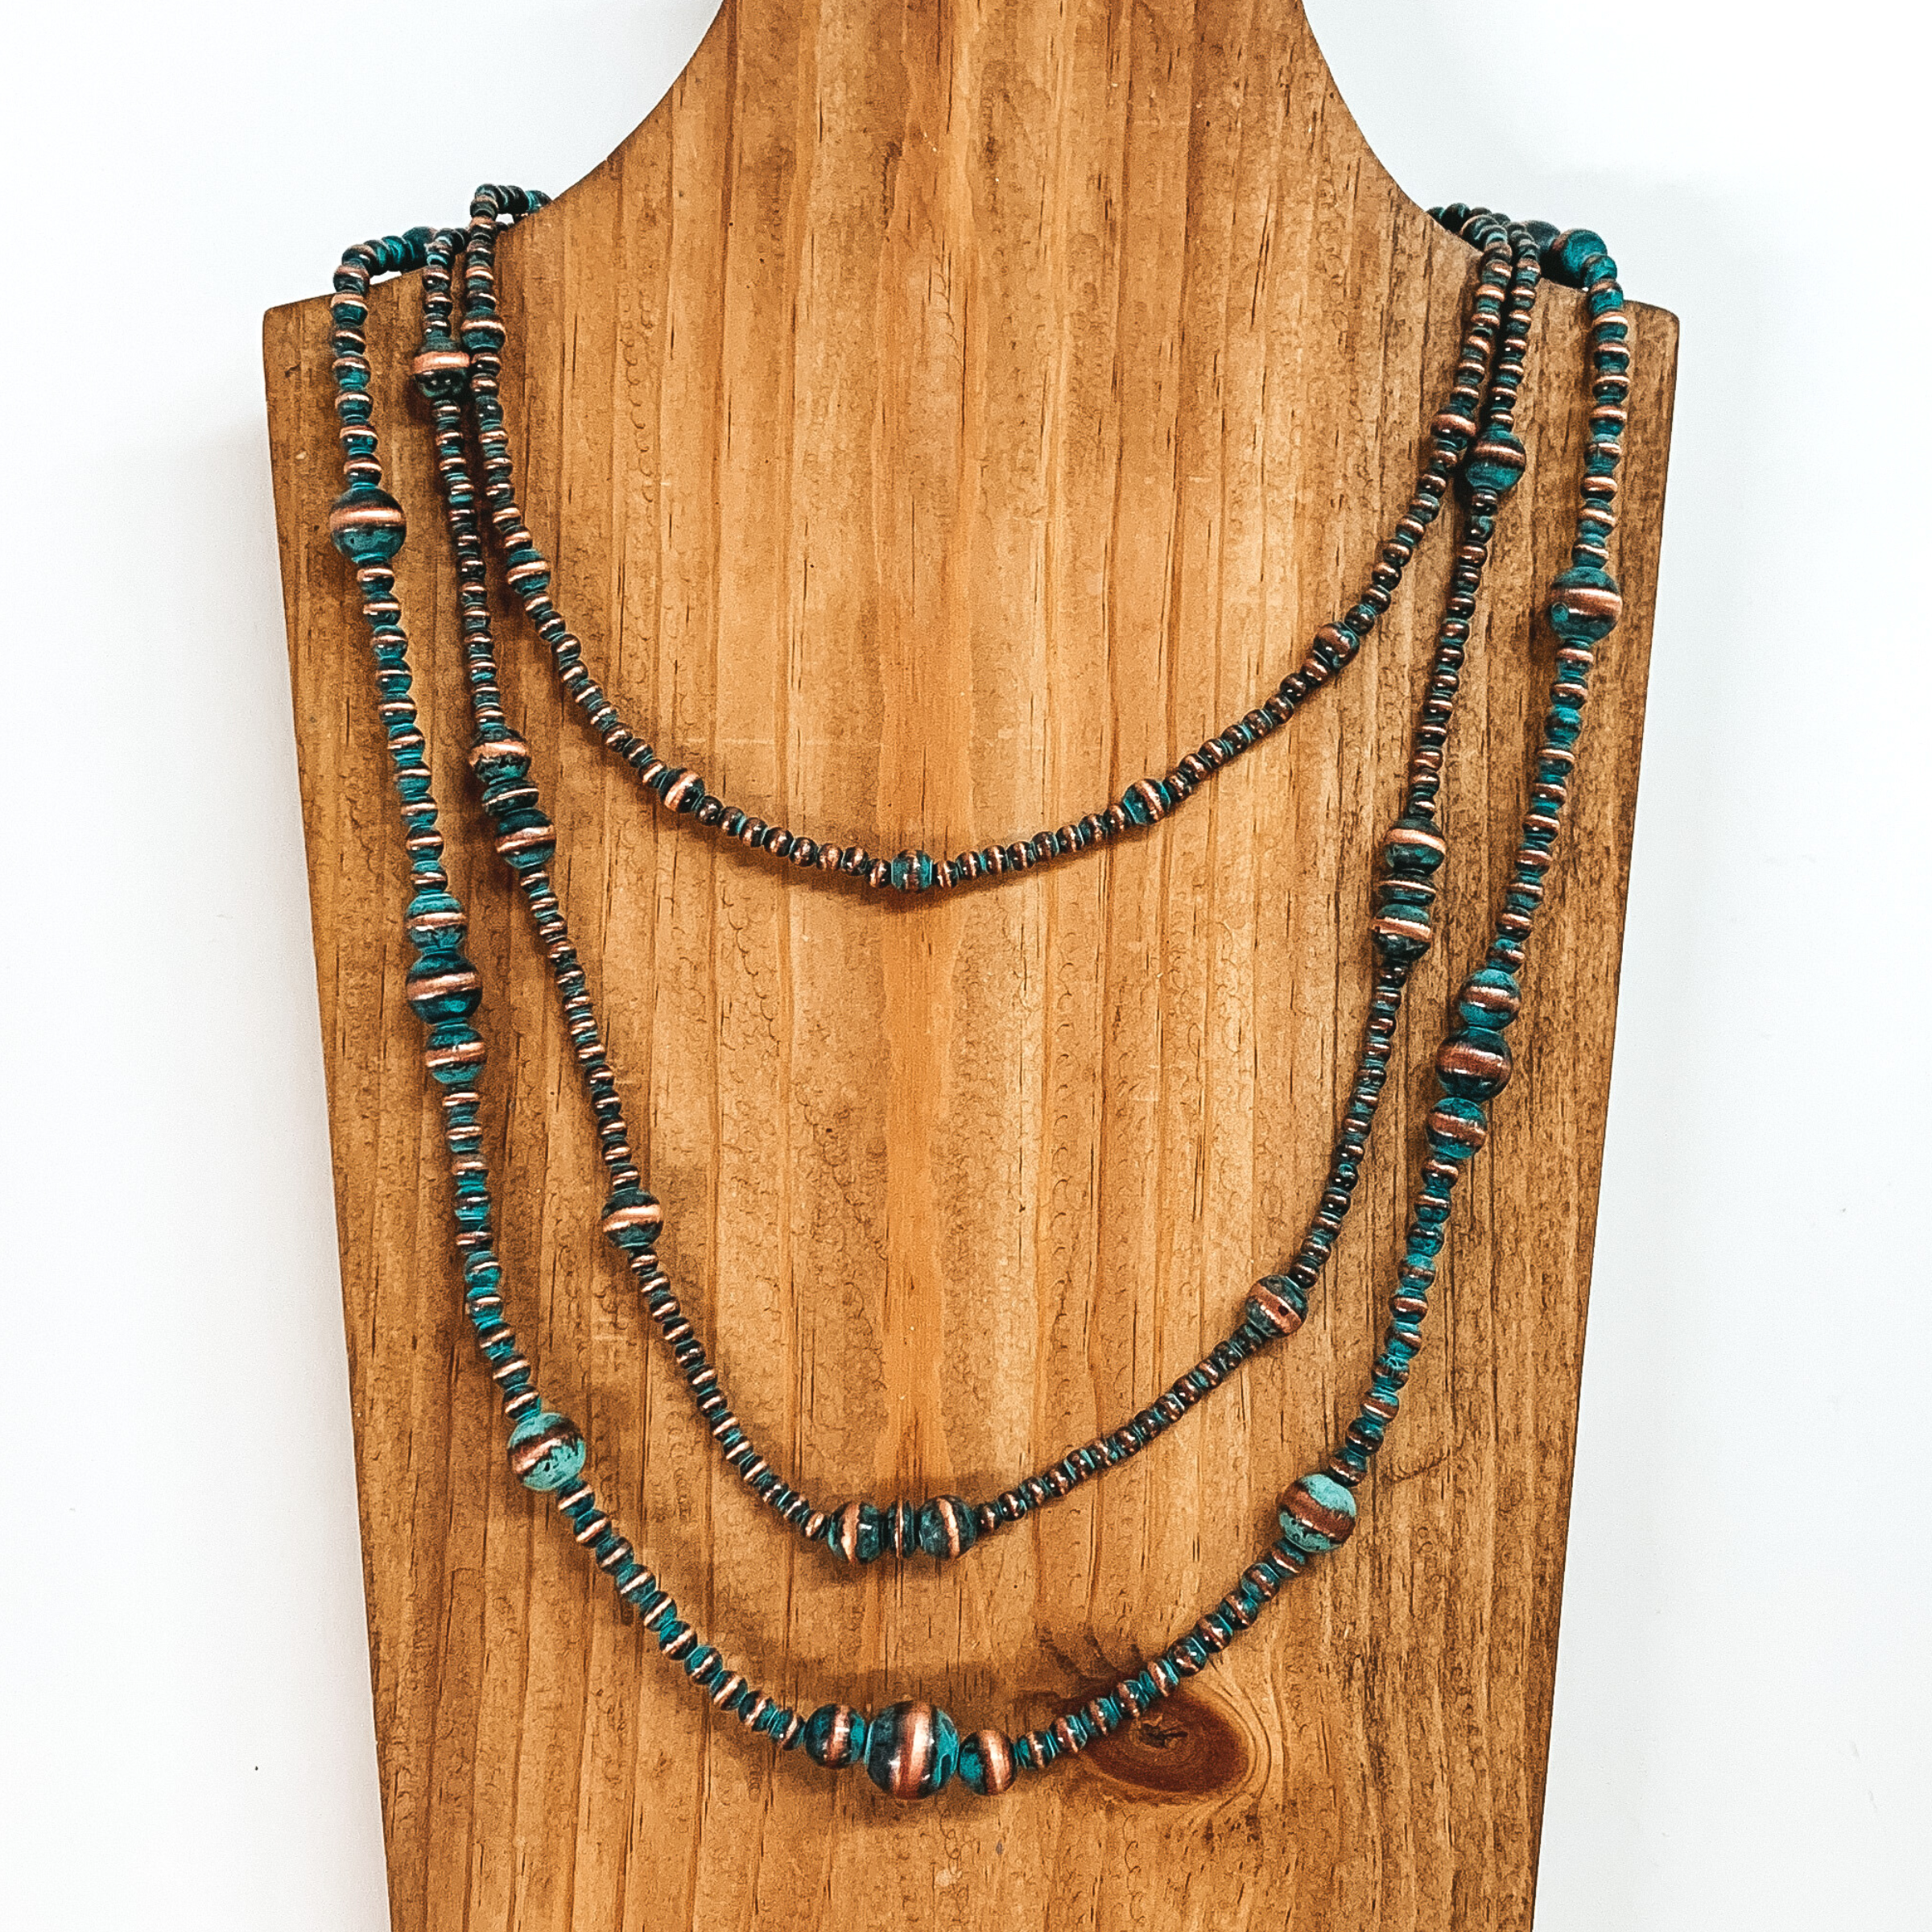 Three Strand Necklace of Faux Navajo Pearls with Graduated Pearls in Patina Tone - Giddy Up Glamour Boutique